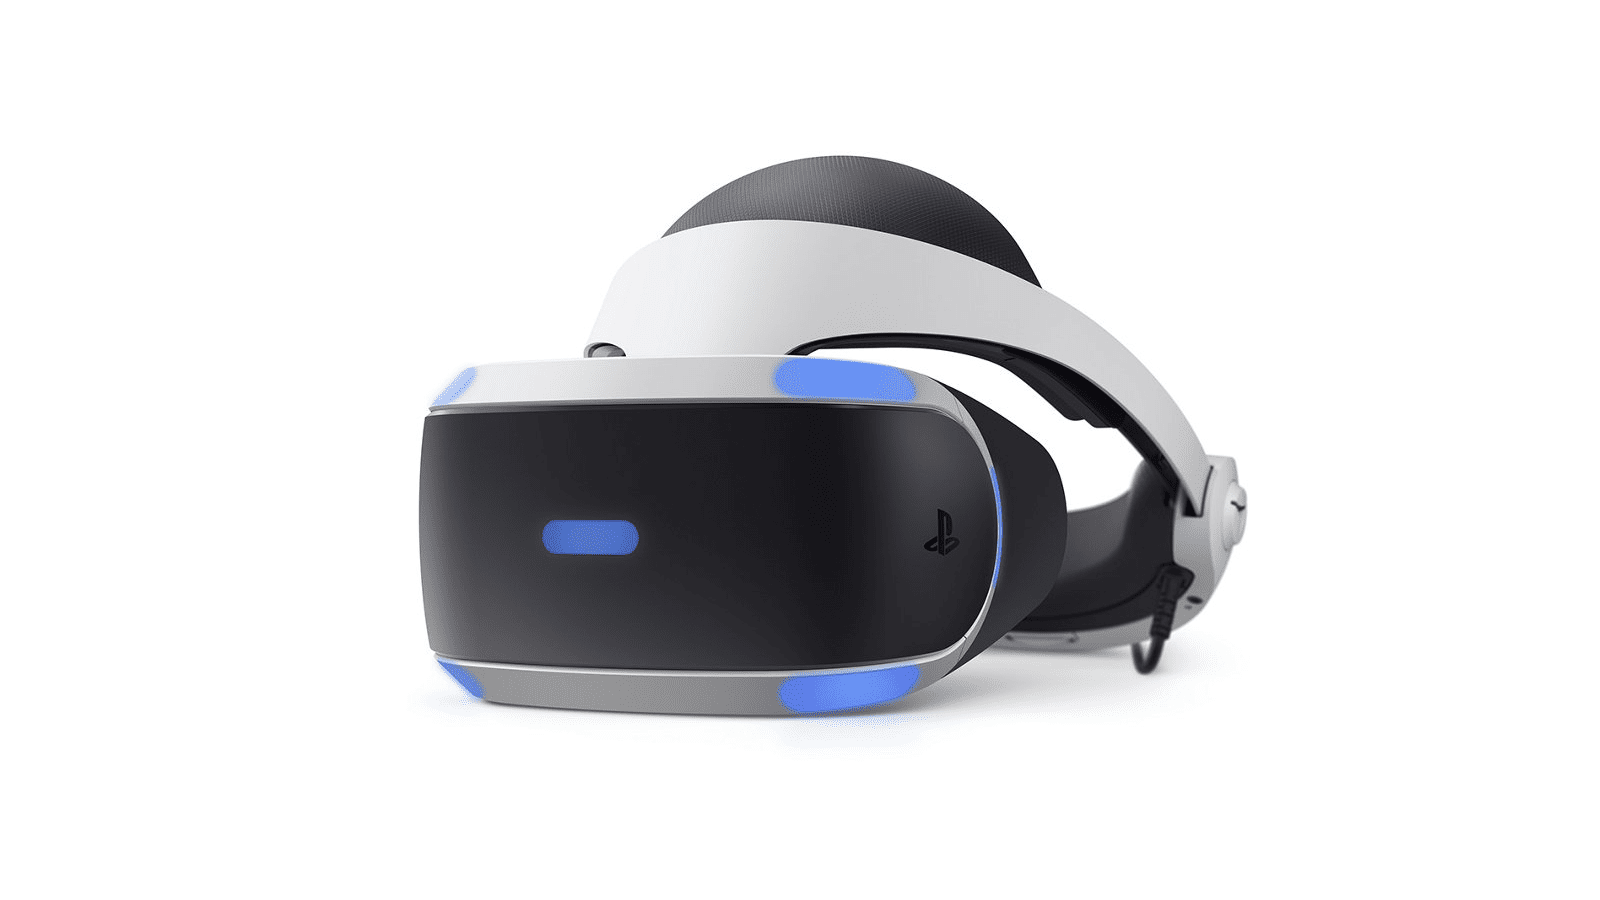 Playstation Vr A Look At Sony S Virtual Reality Headset